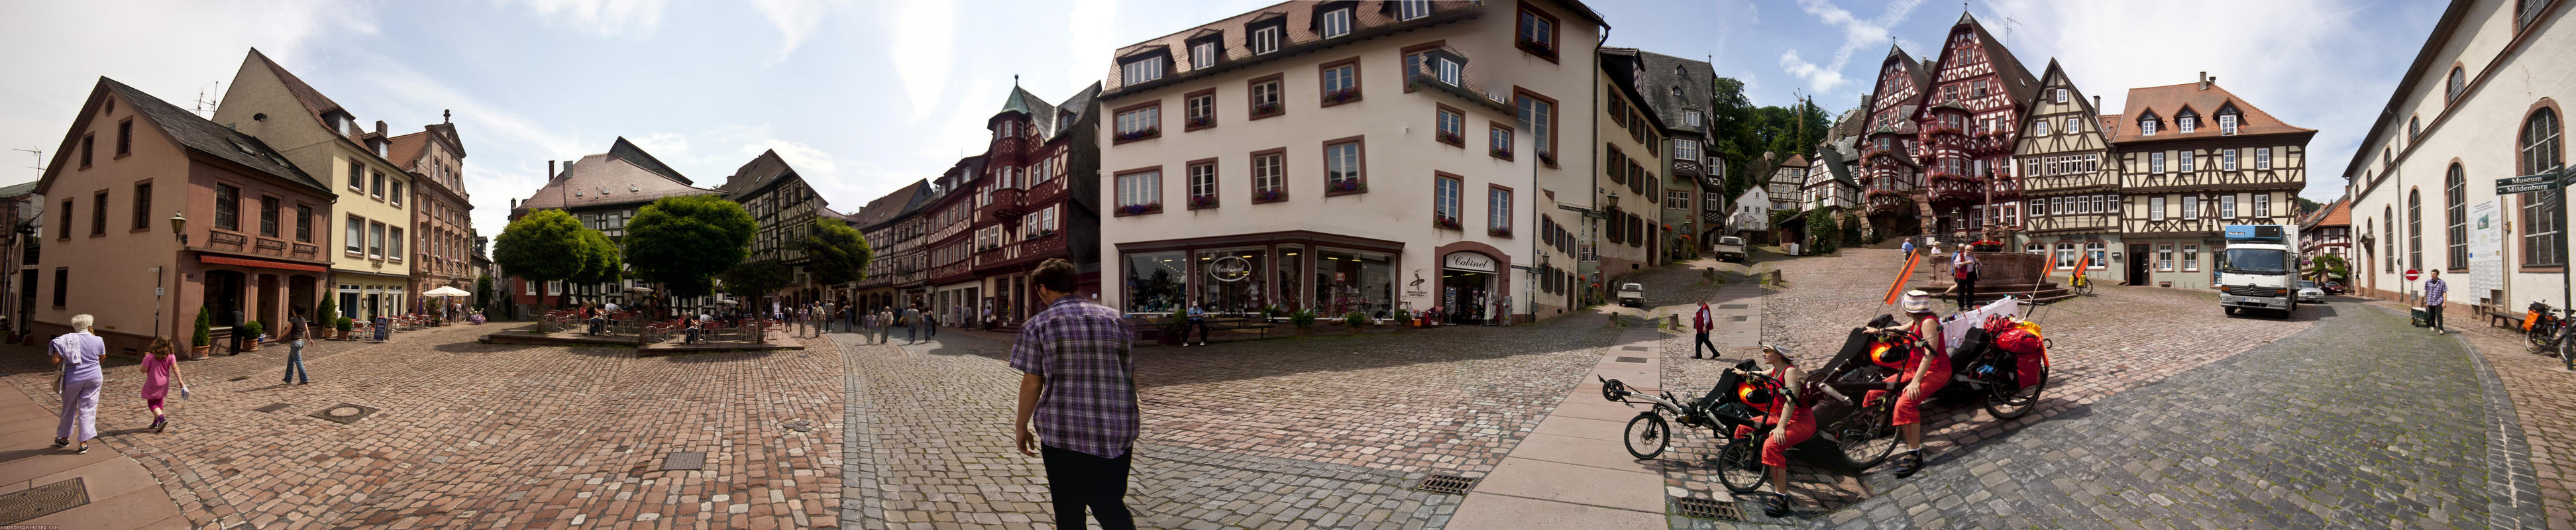 ﻿Miltenberg. Here as a slightly damaged panorama photo ;-)